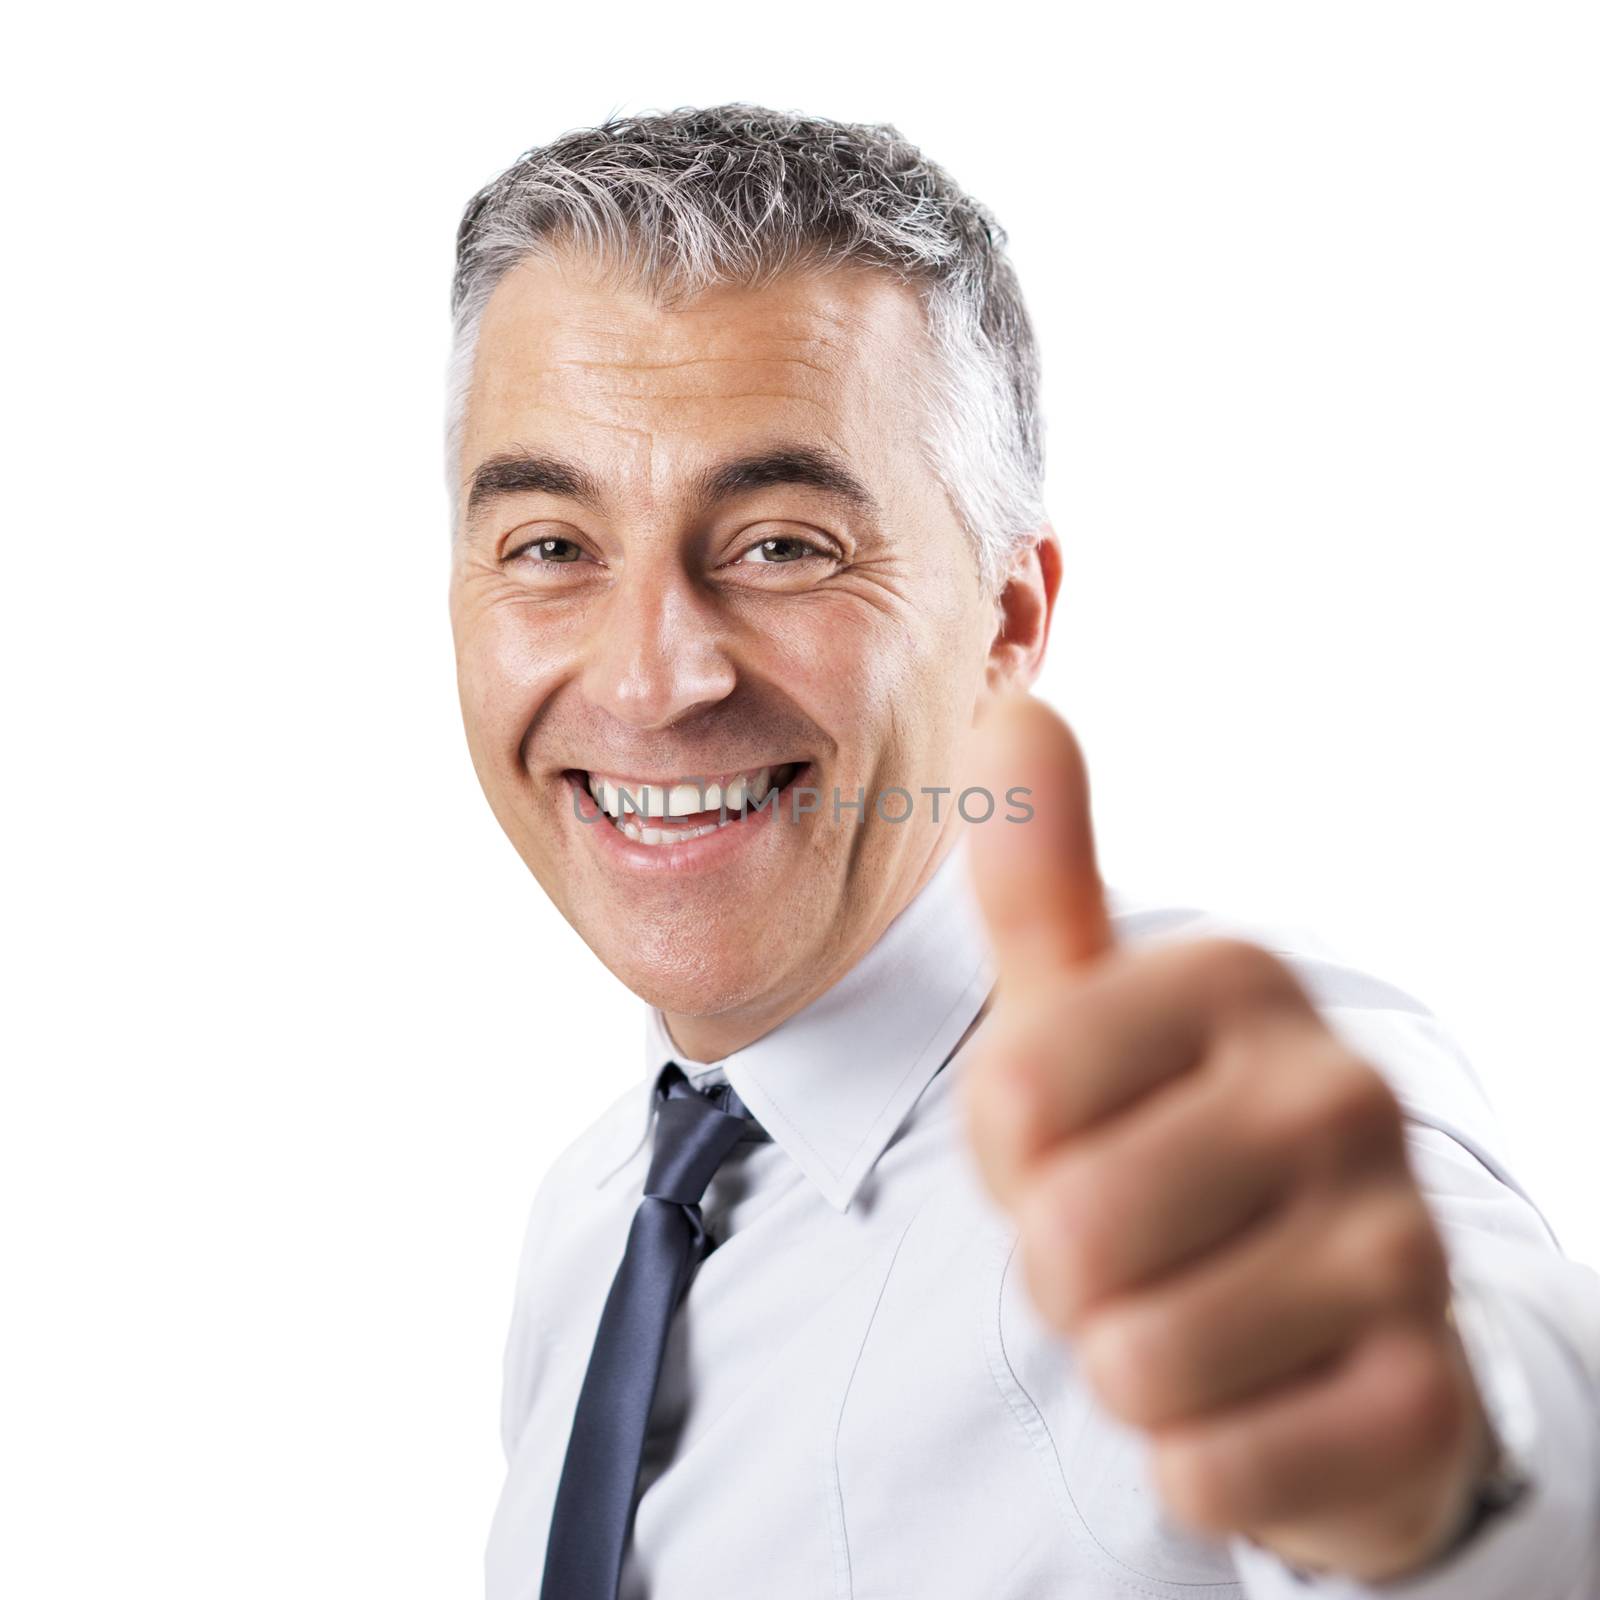 Smiling confident businessman tumbs up on white background.